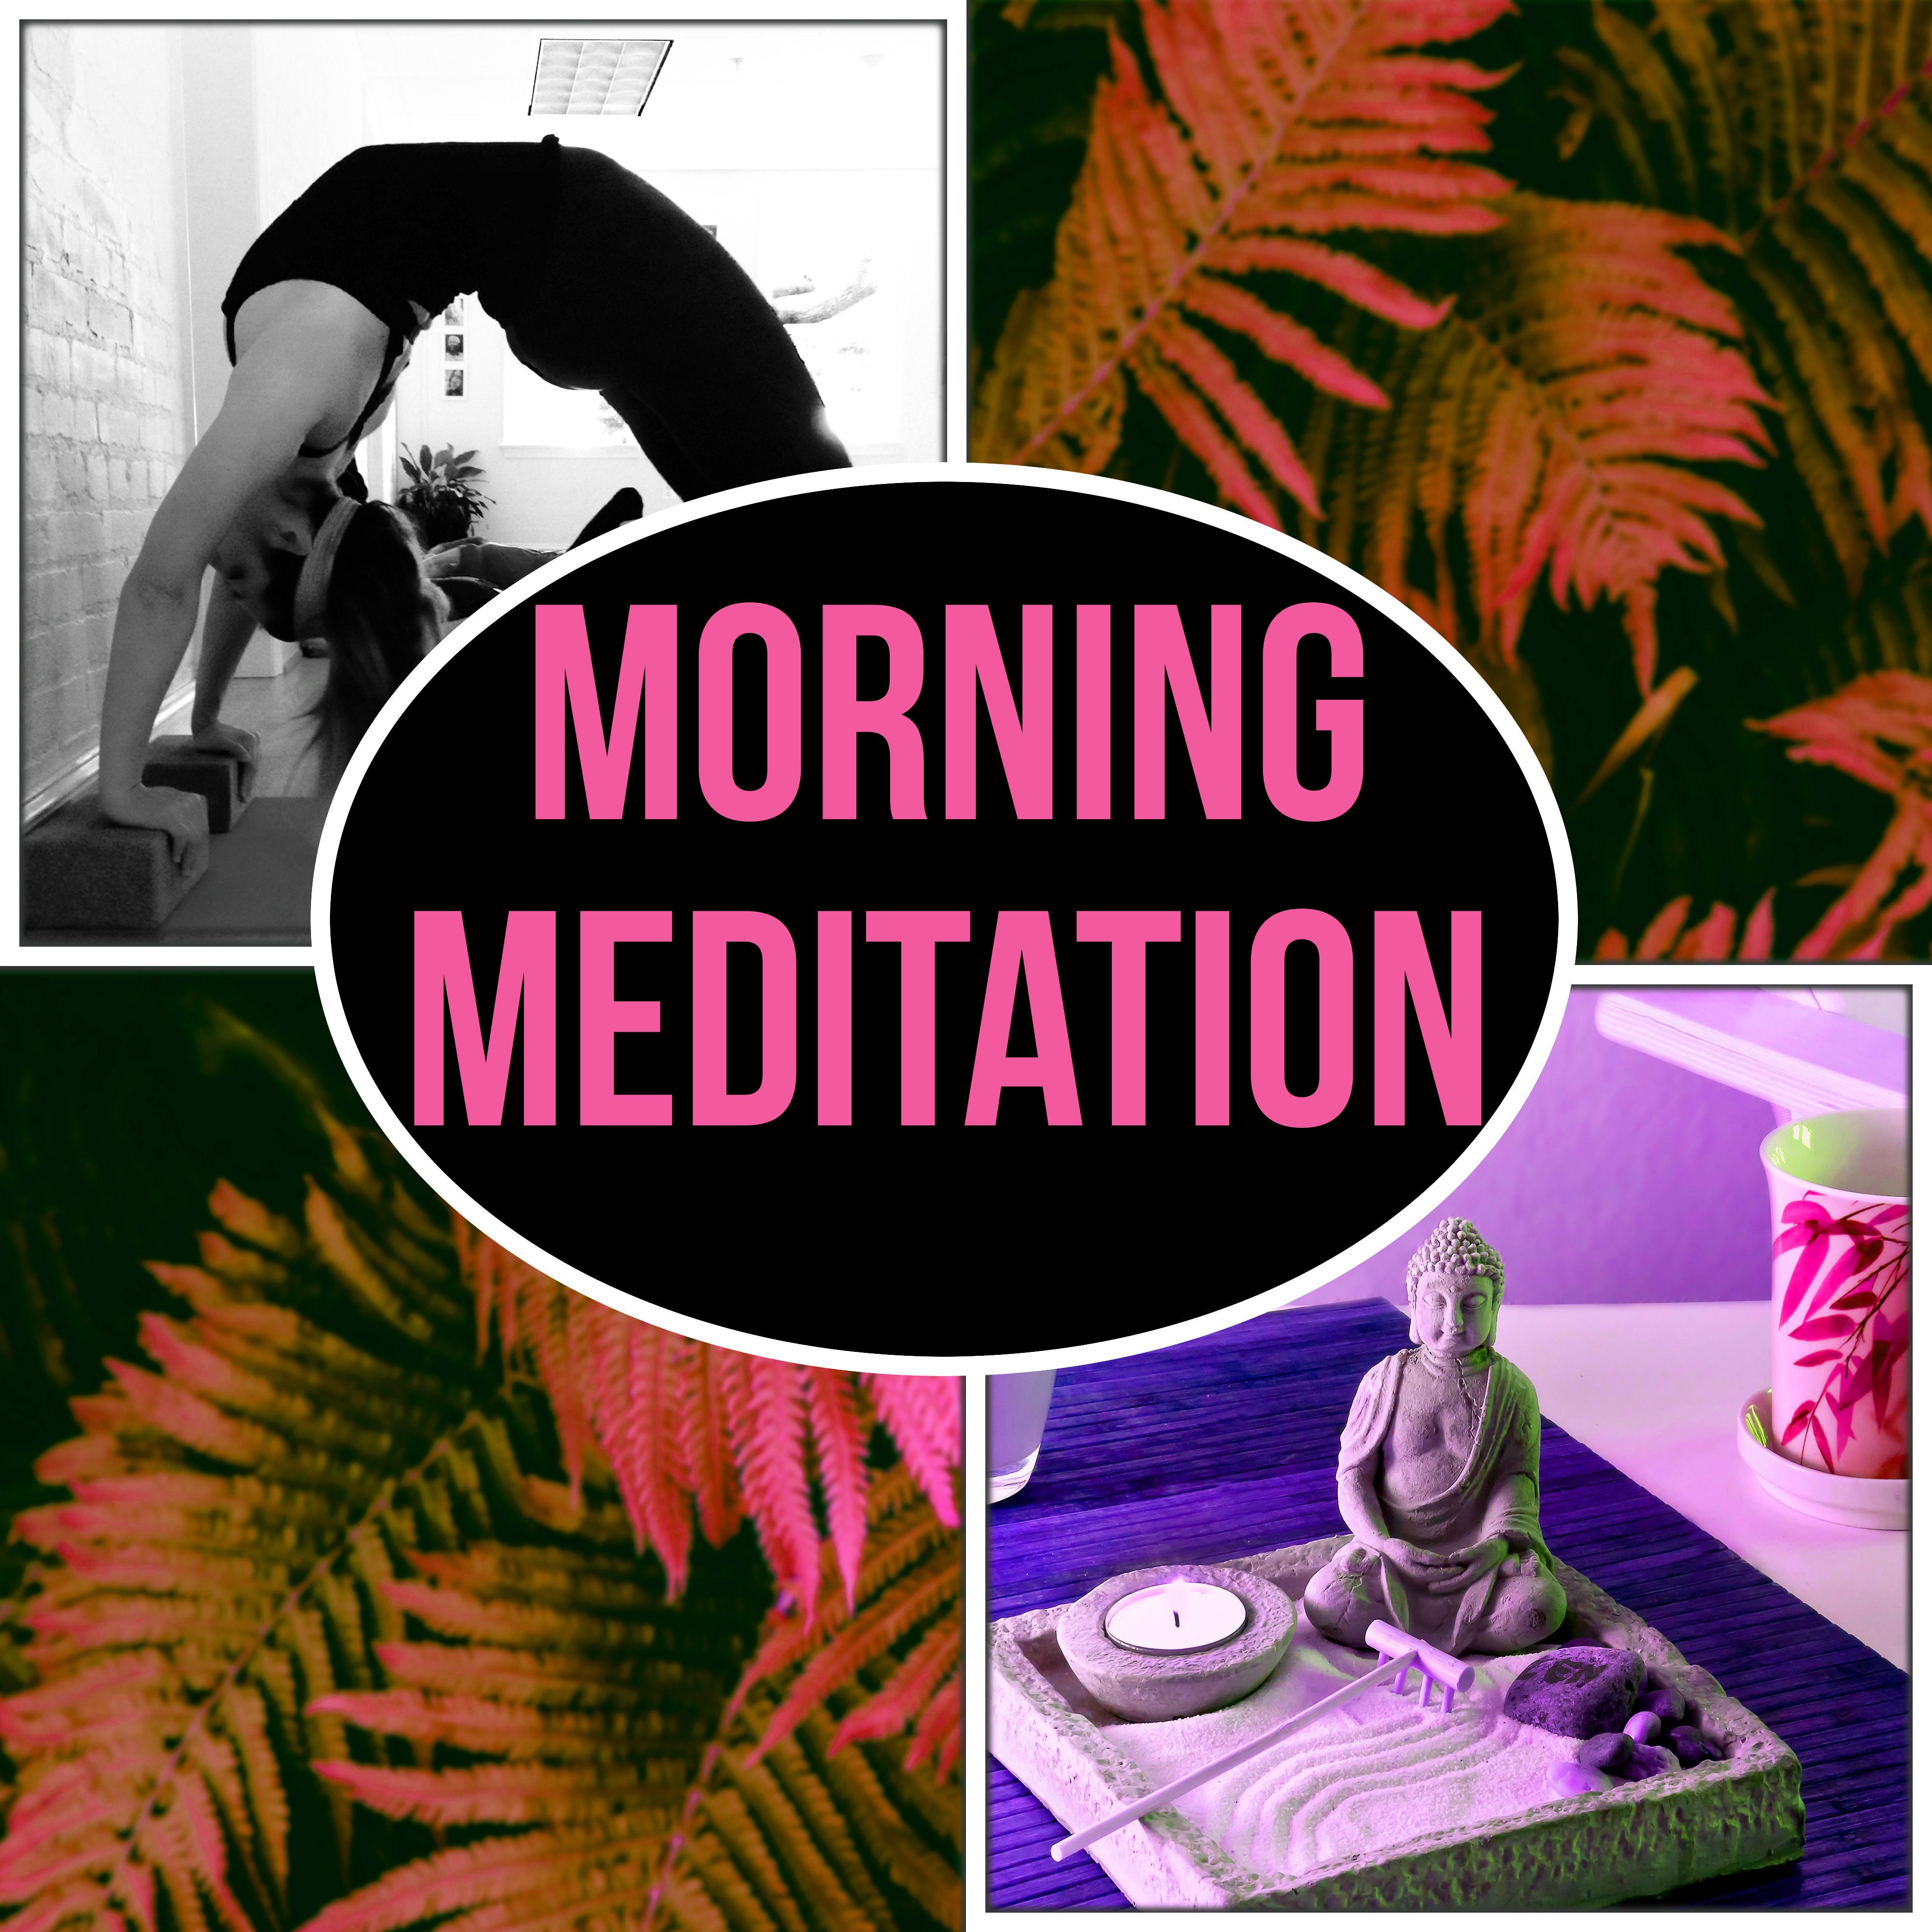 Morning Meditation –  Yoga New Age, Relaxation, Nature Sounds, Calmness, Concentration